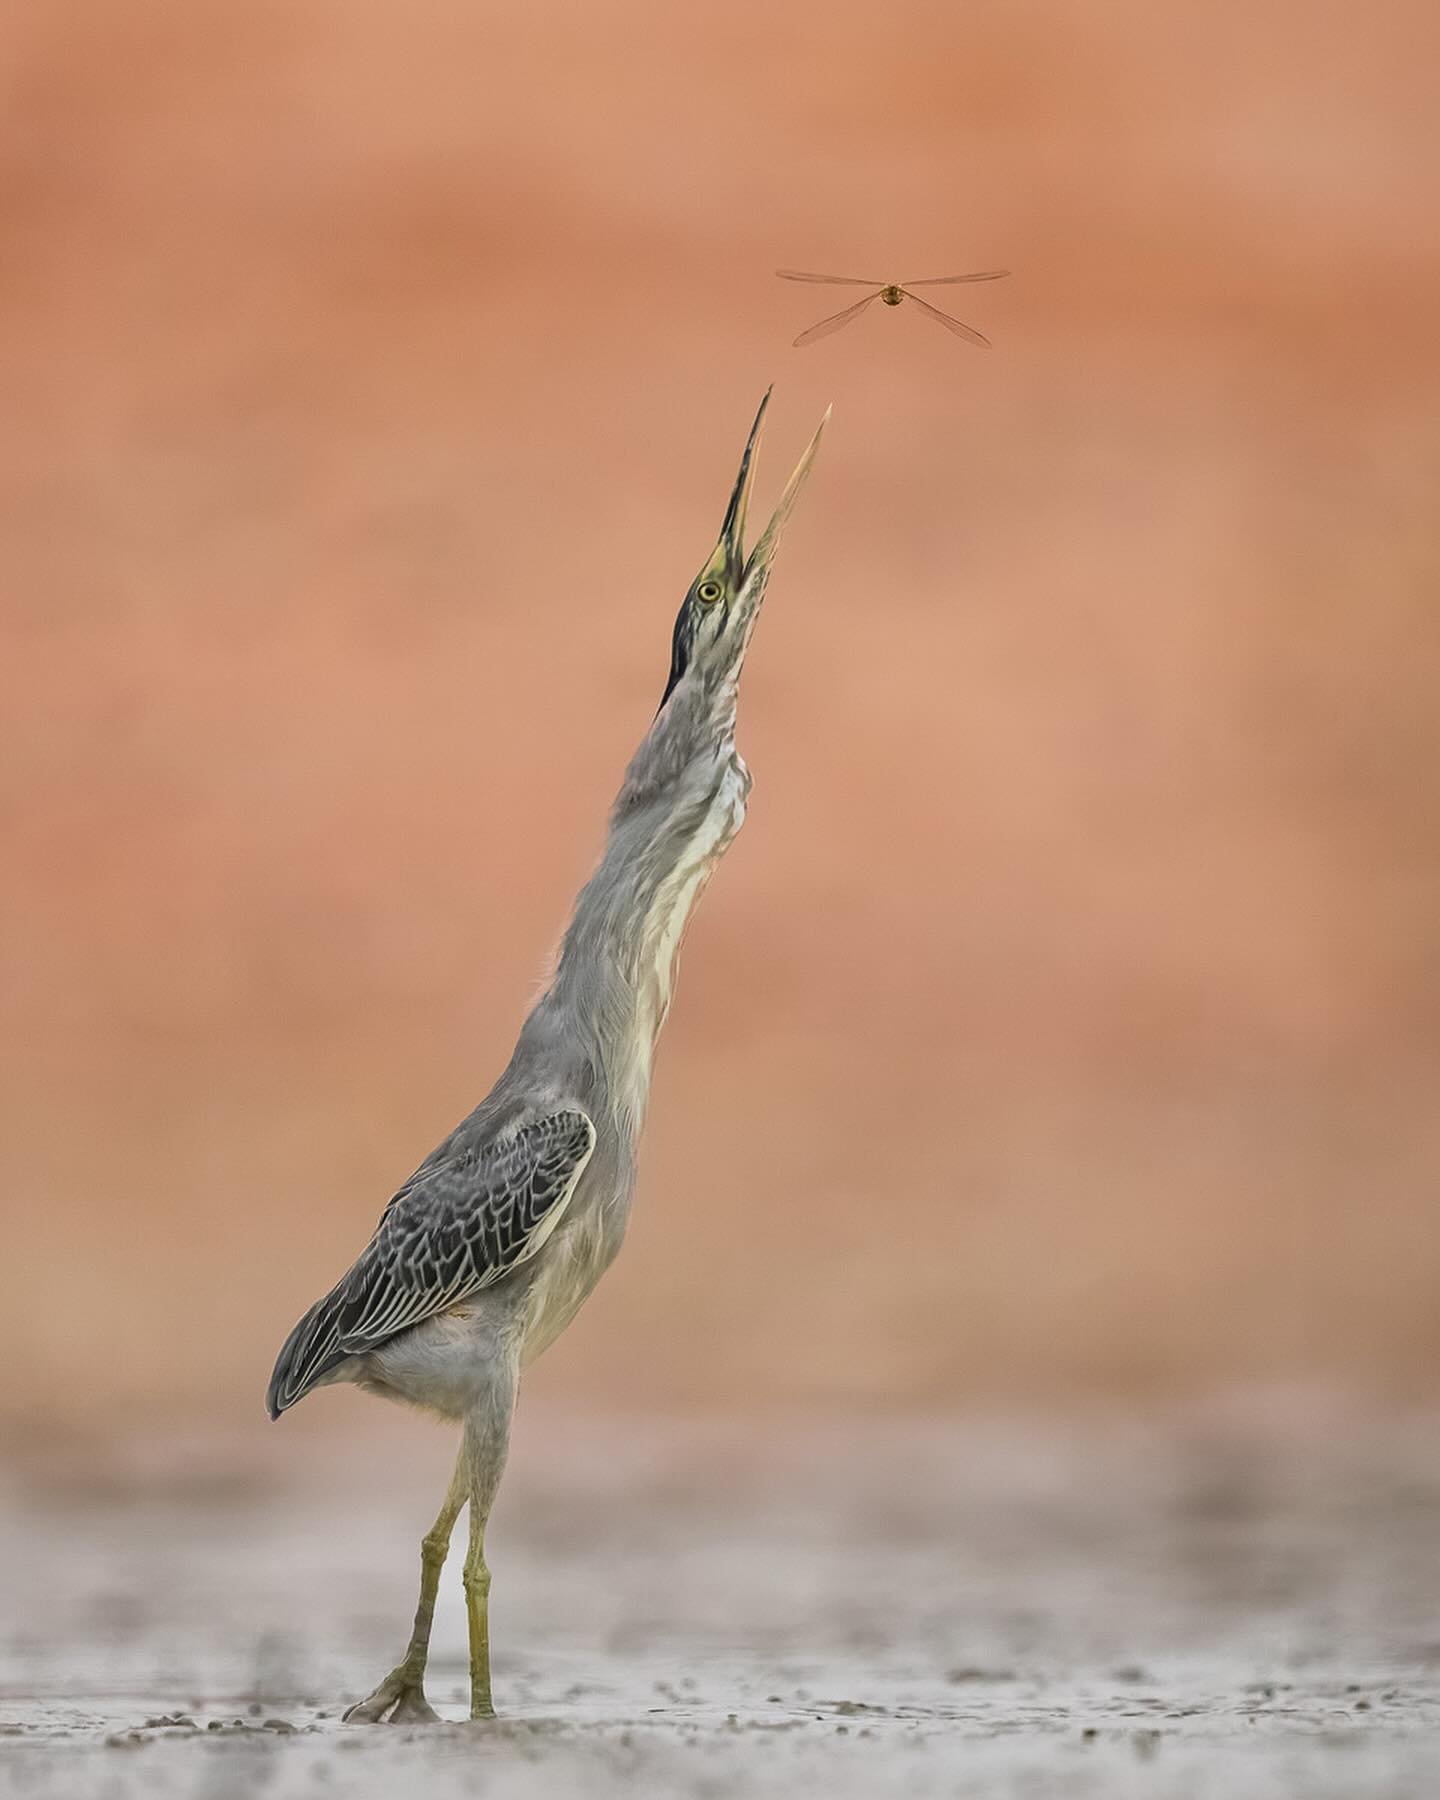 Striated Heron.
While waiting for a heron to take a mudskipper I was absolutely astonished to see them launch themselves upwards and take dragonflies out of the air. 
Swipe for the full action!

Light was fading but I quickly worked out I needed 1/25